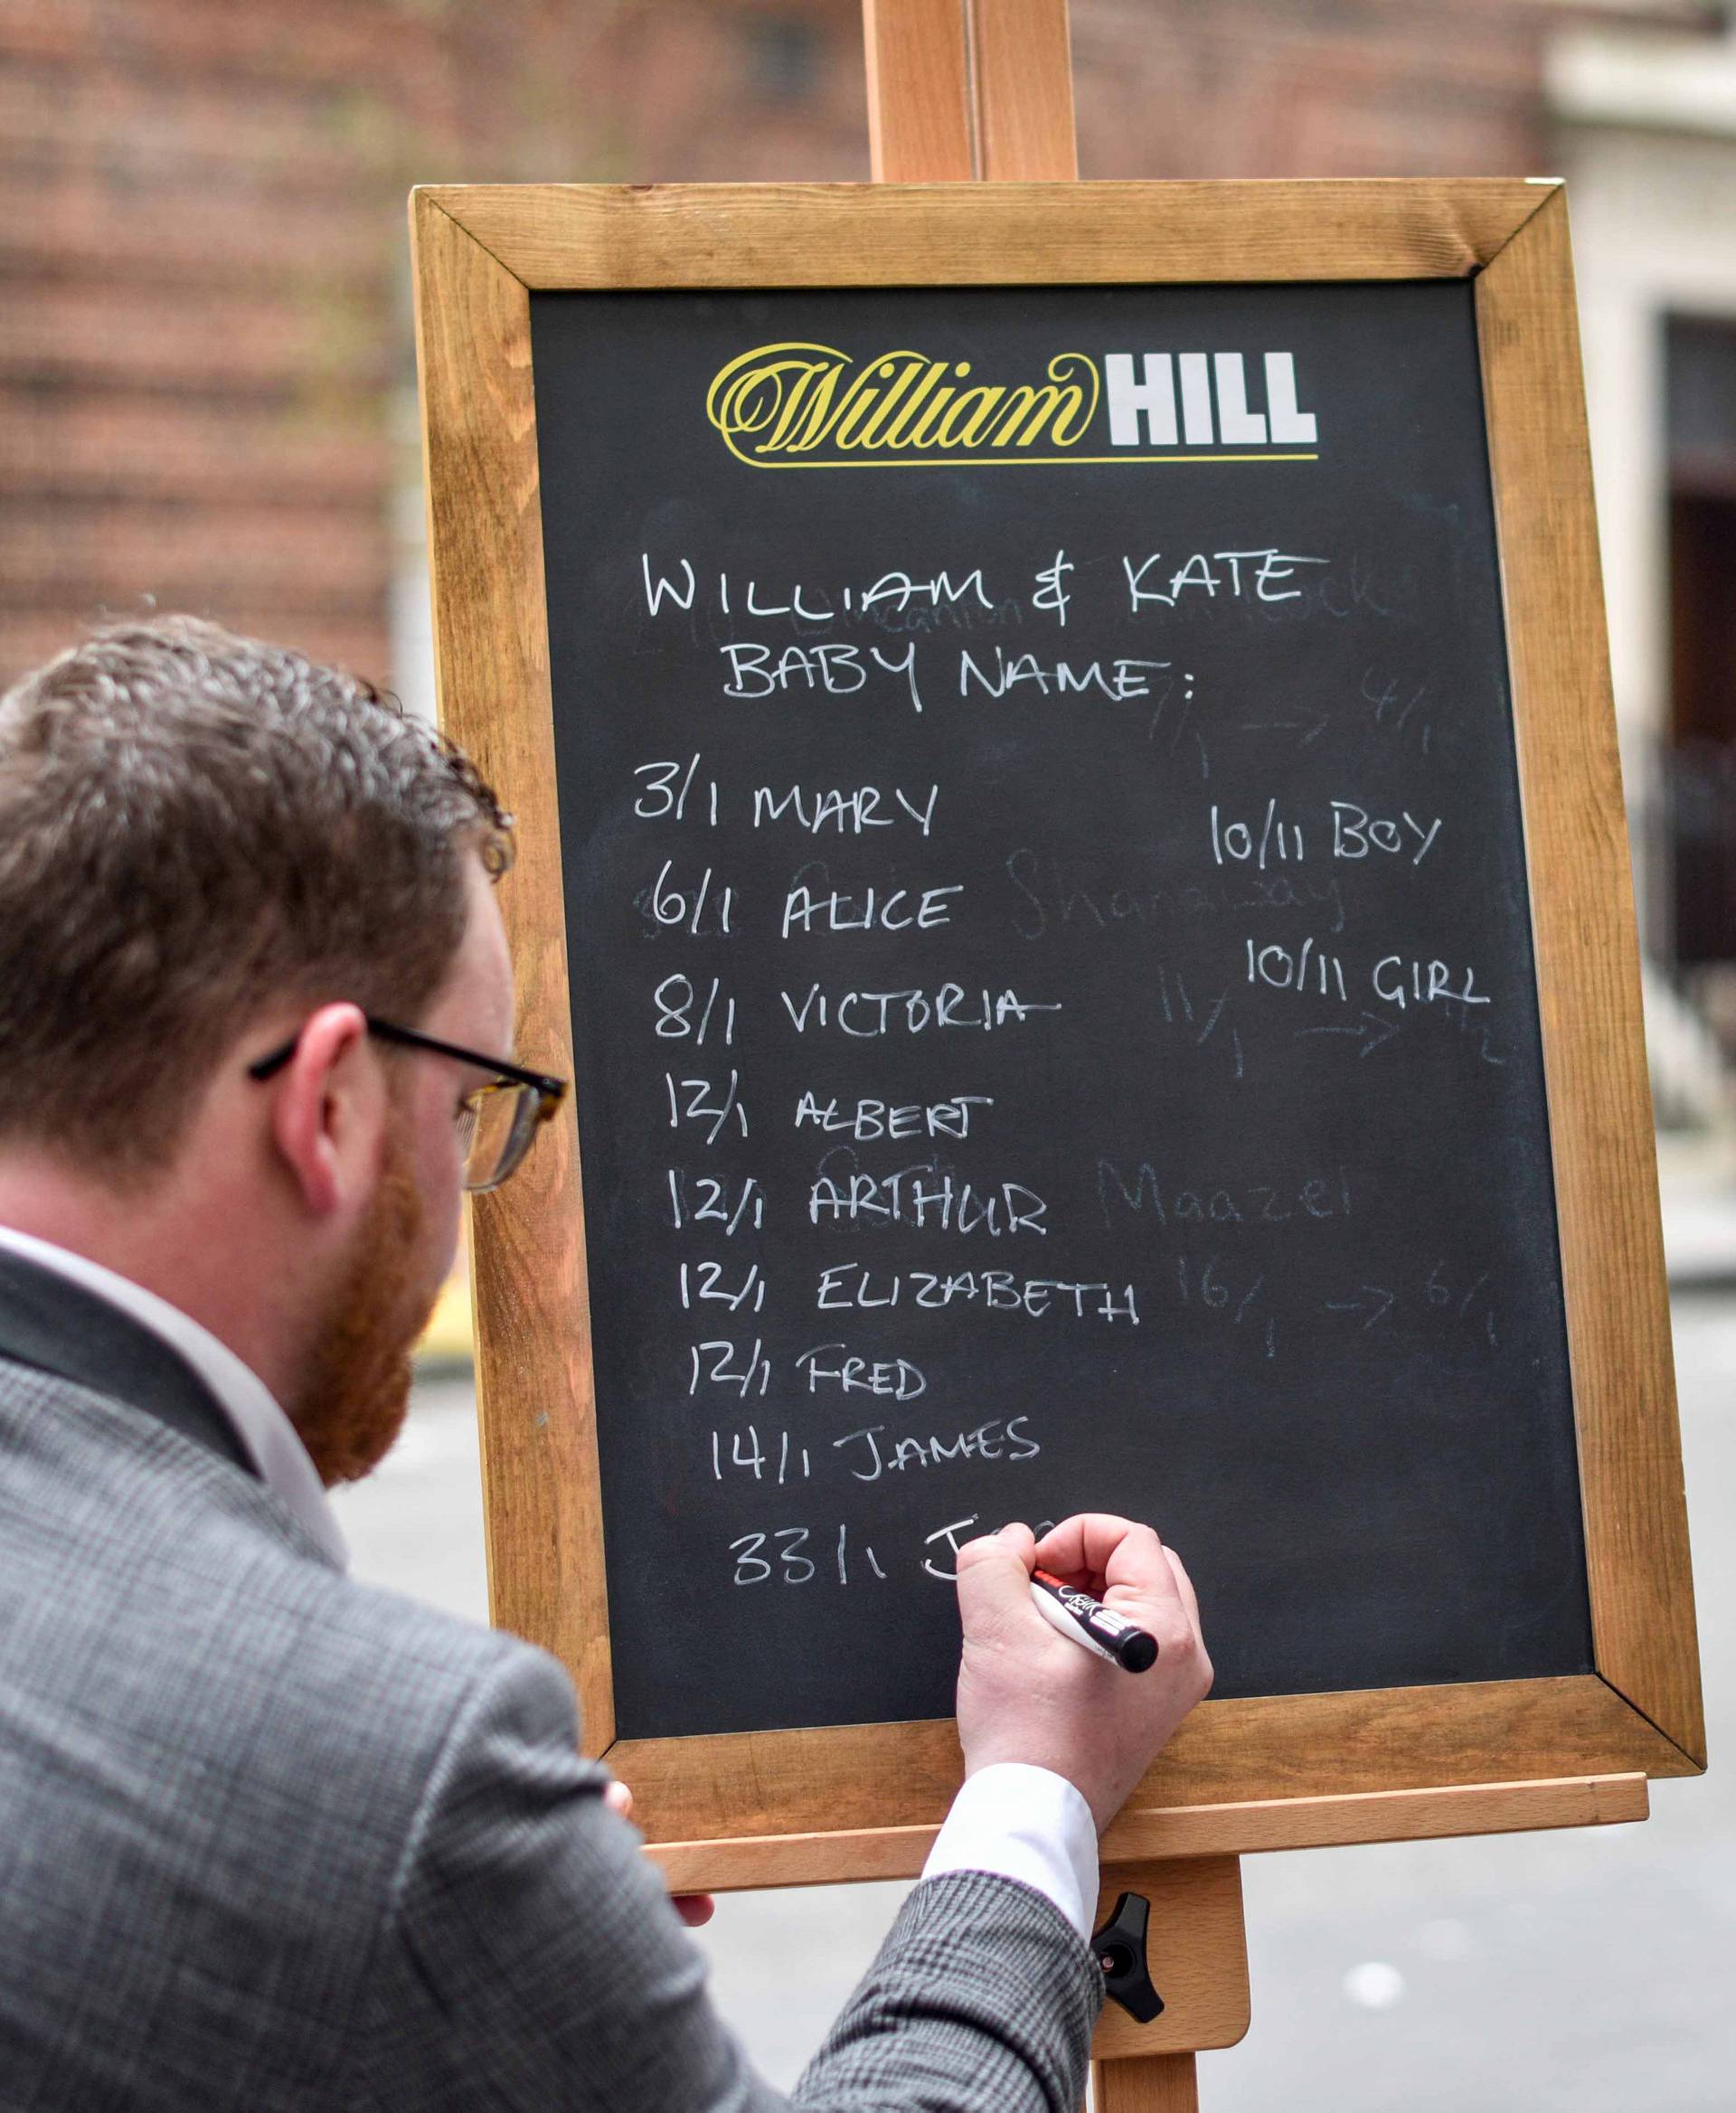 Joe Crilly, a spokesperson from the bookmaker William Hill, writes the names and betting odds for the third royal baby of Britain's Prince William and Catherine, Duchess of Cambridge, on a board outside the Lindo Wing St Mary's Hospital in west London